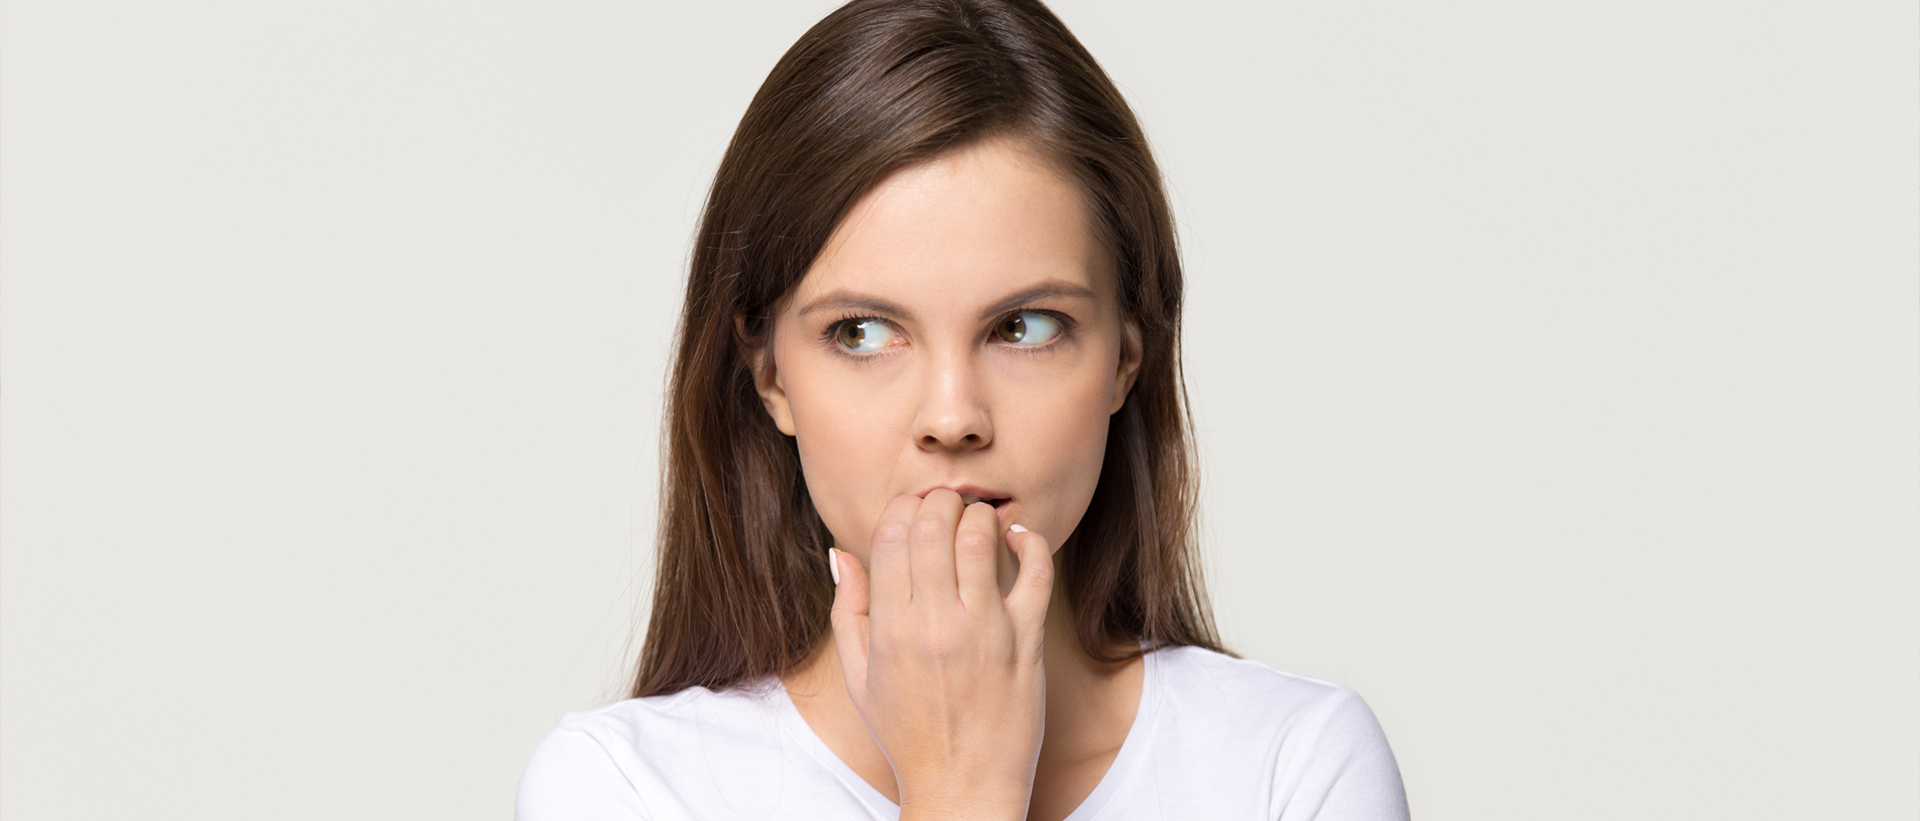 Measuring Dental Fear – Are You Phobic?